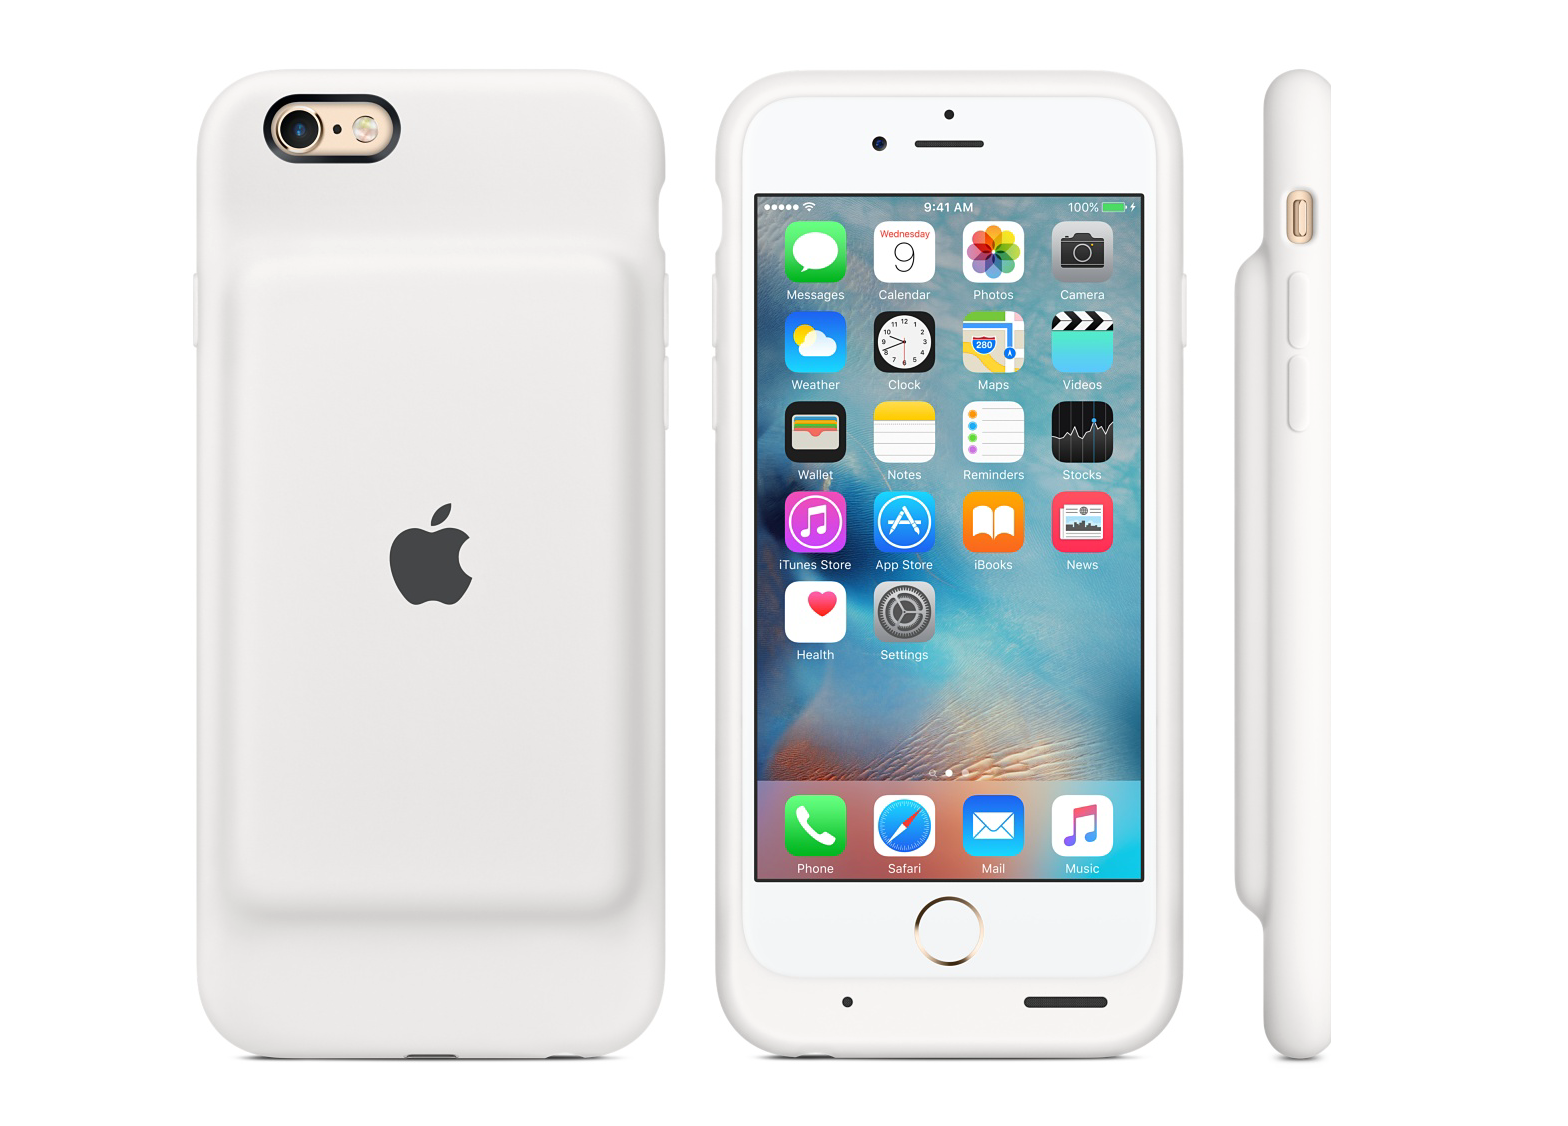 apple solves iphone battery woes with new smart battery case image 1